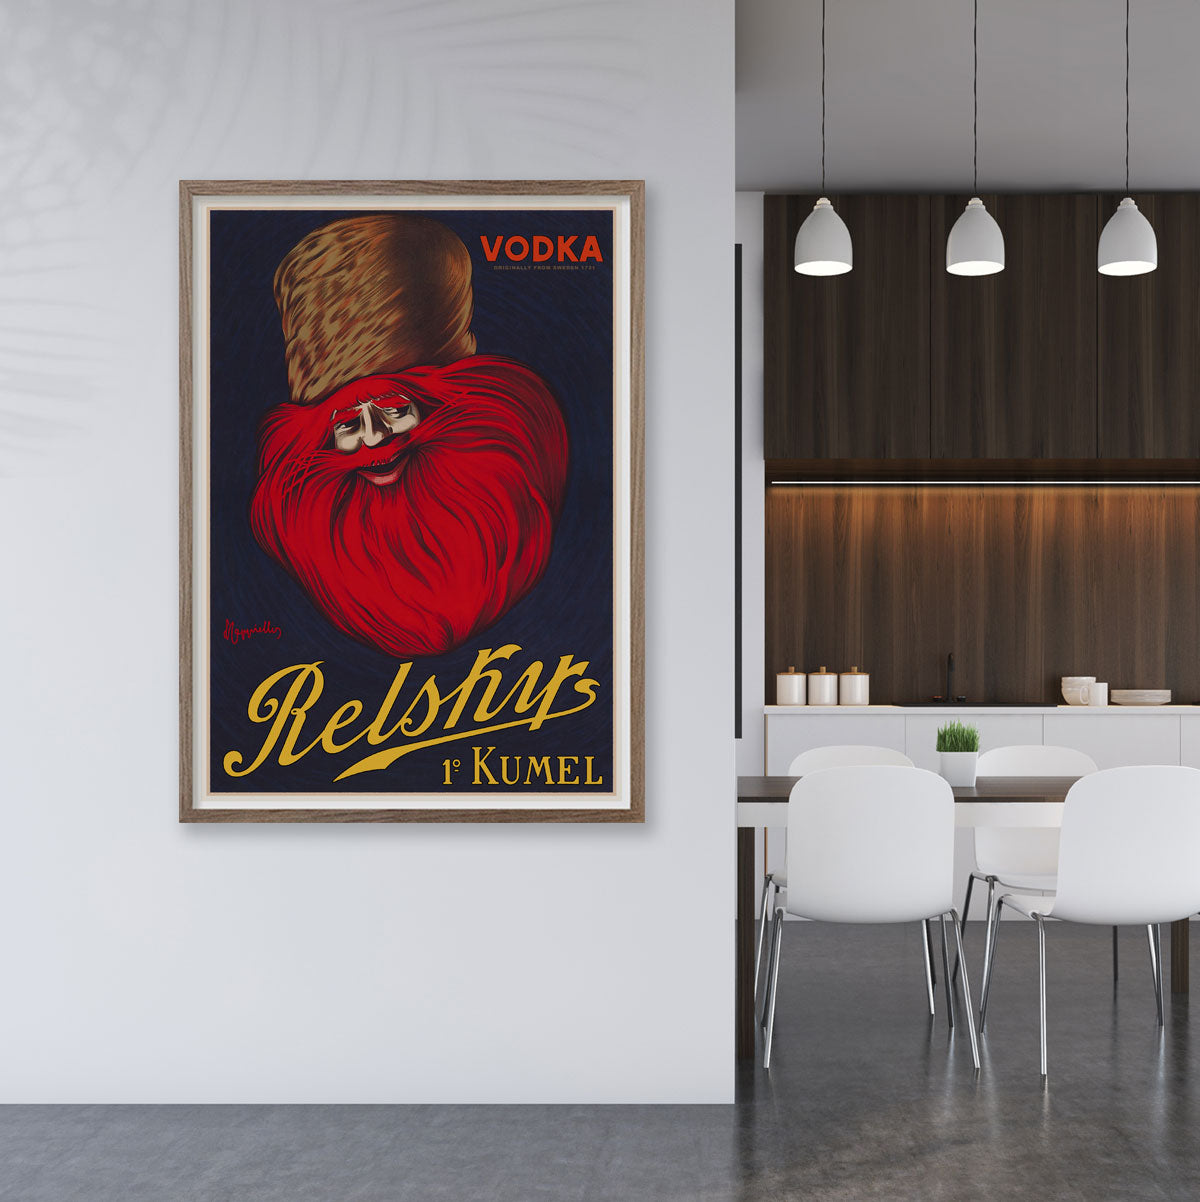 Relskys Vodka retro vintage poster from Places We Luv